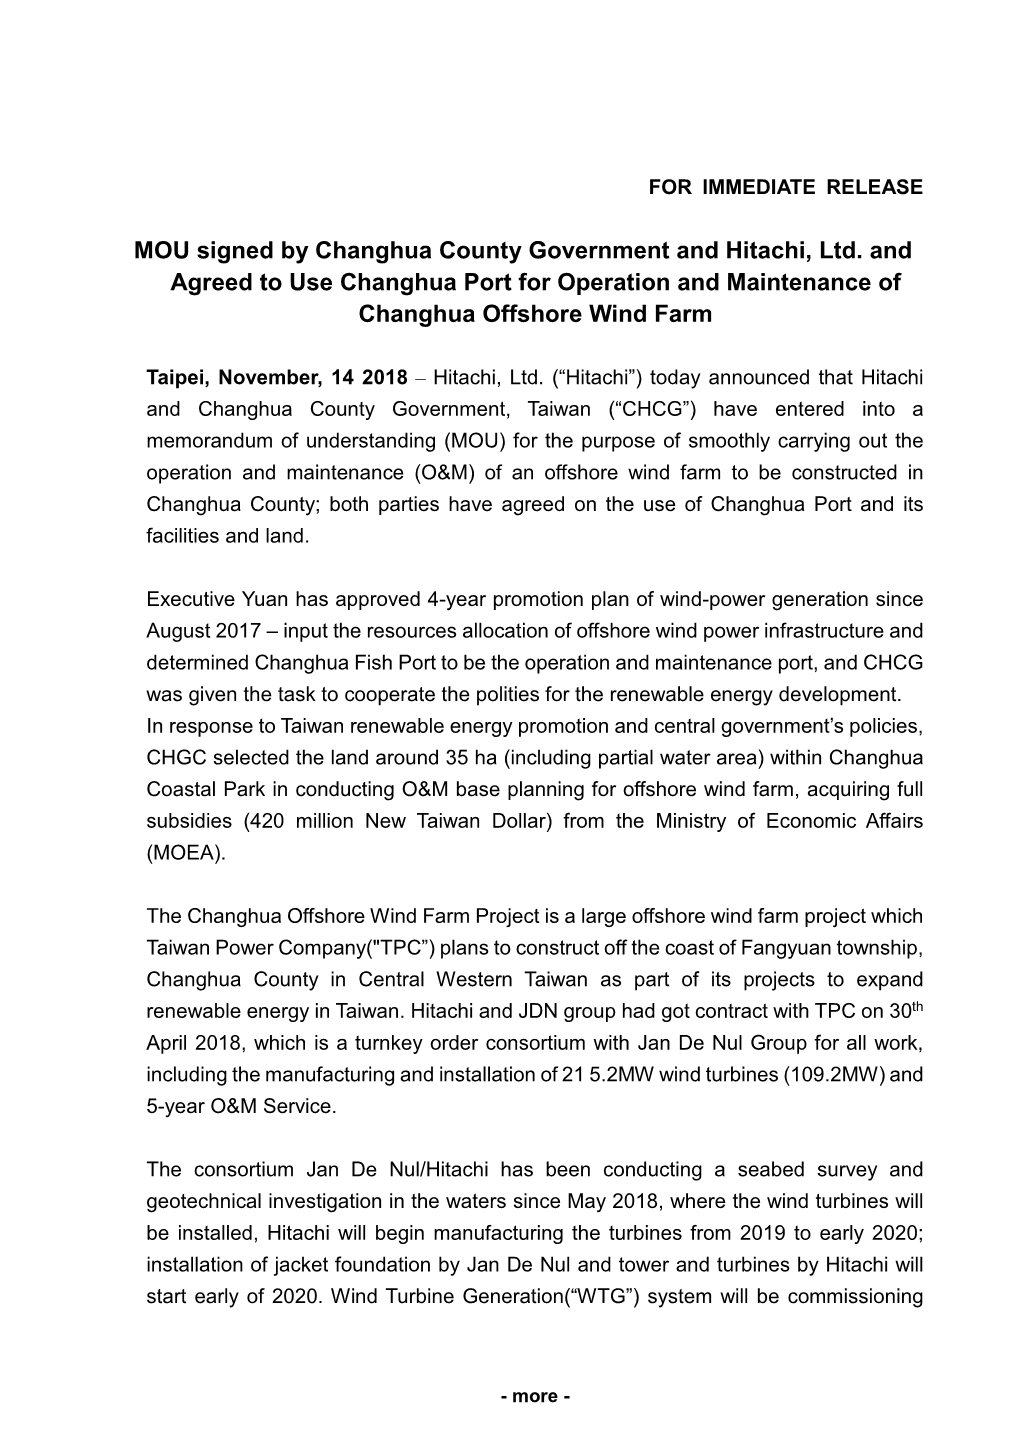 MOU Signed by Changhua County Government and Hitachi, Ltd. and Agreed to Use Changhua Port for Operation and Maintenance of Changhua Offshore Wind Farm